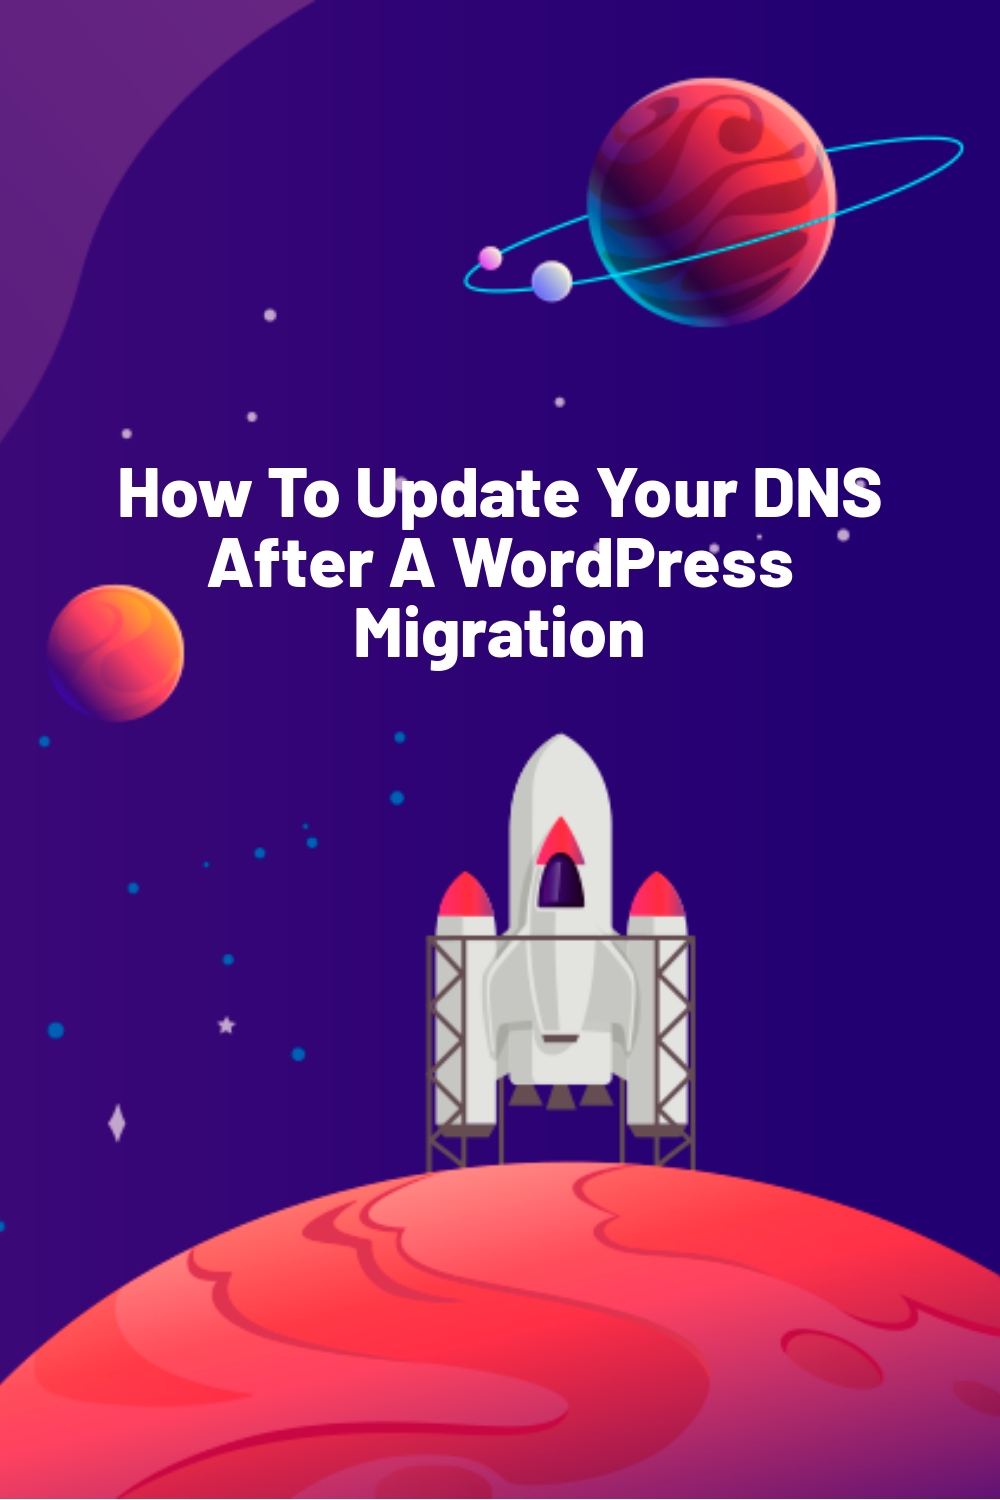 How To Update Your DNS After A WordPress Migration